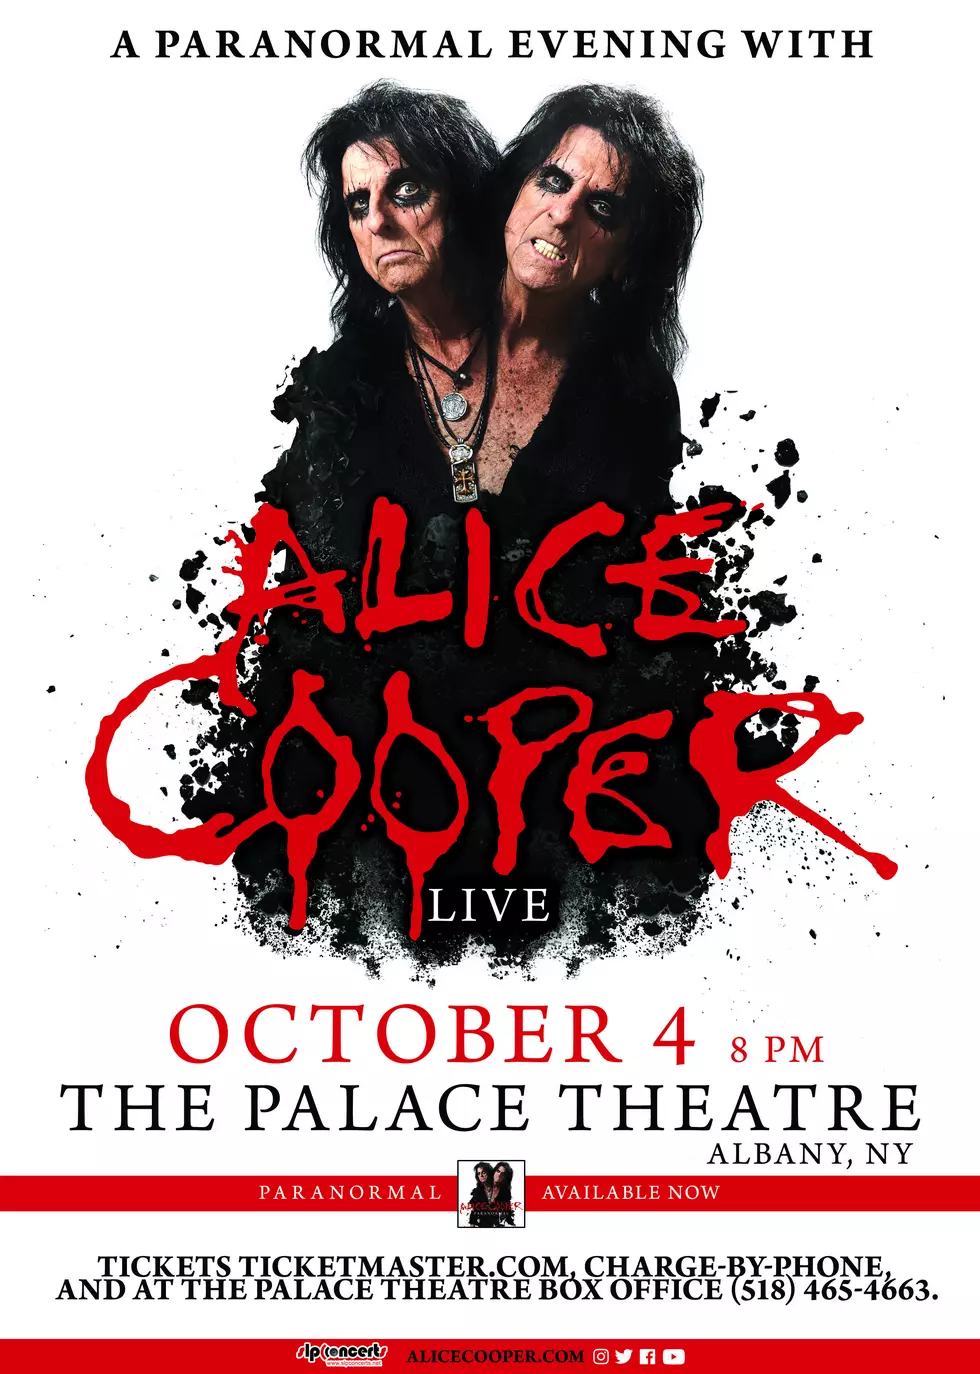 Join Q103 for a Paranormal Evening with Alice Cooper